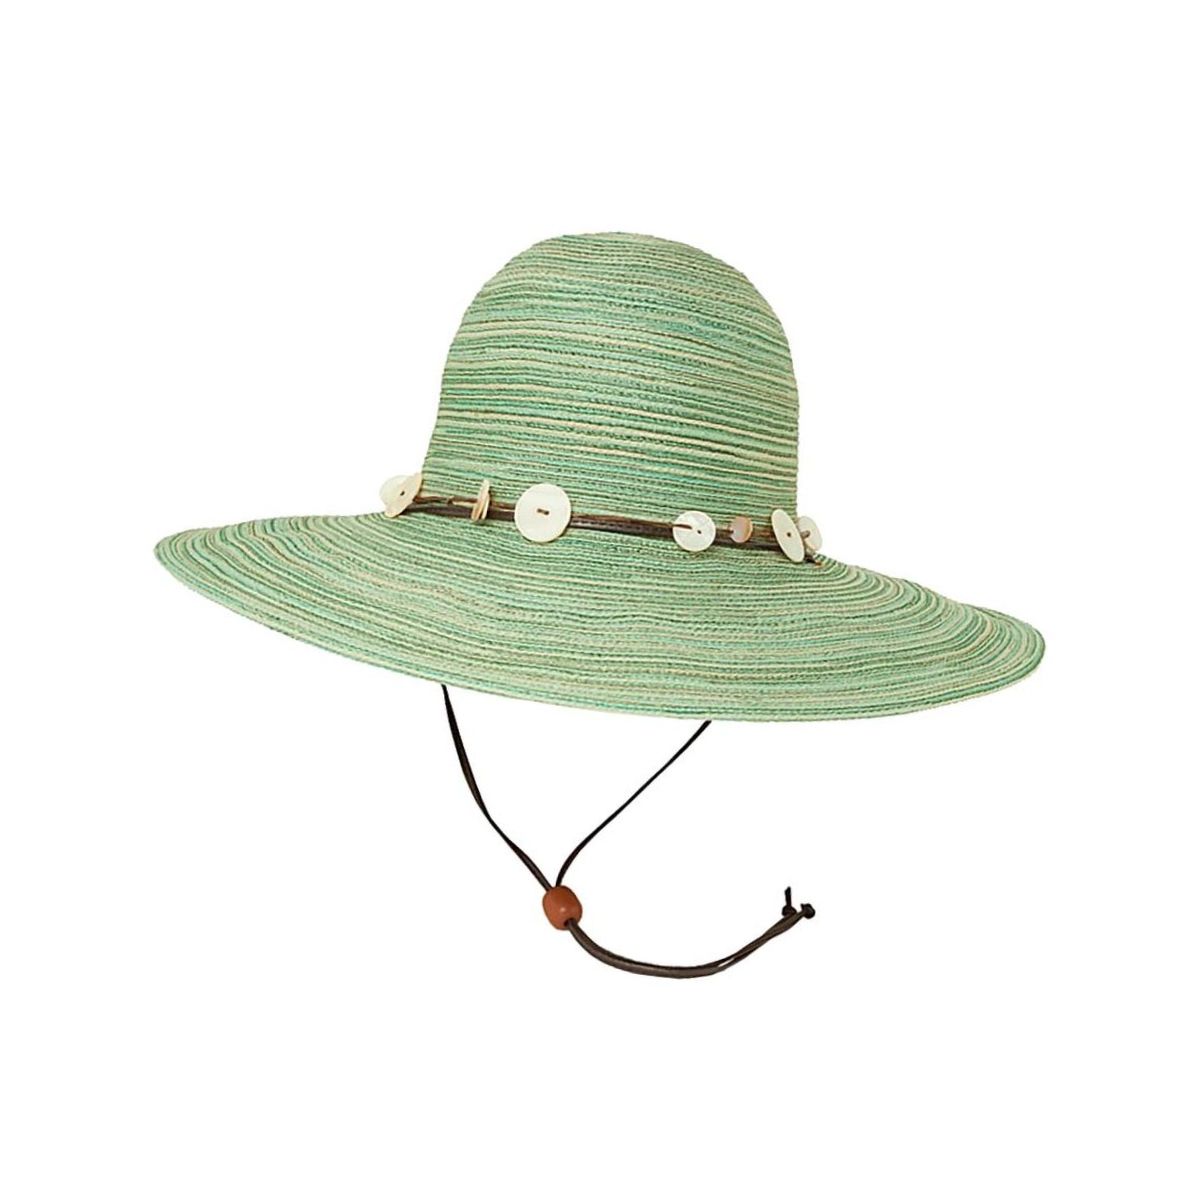 Sunday Afternoons Caribbean Hat - Women's